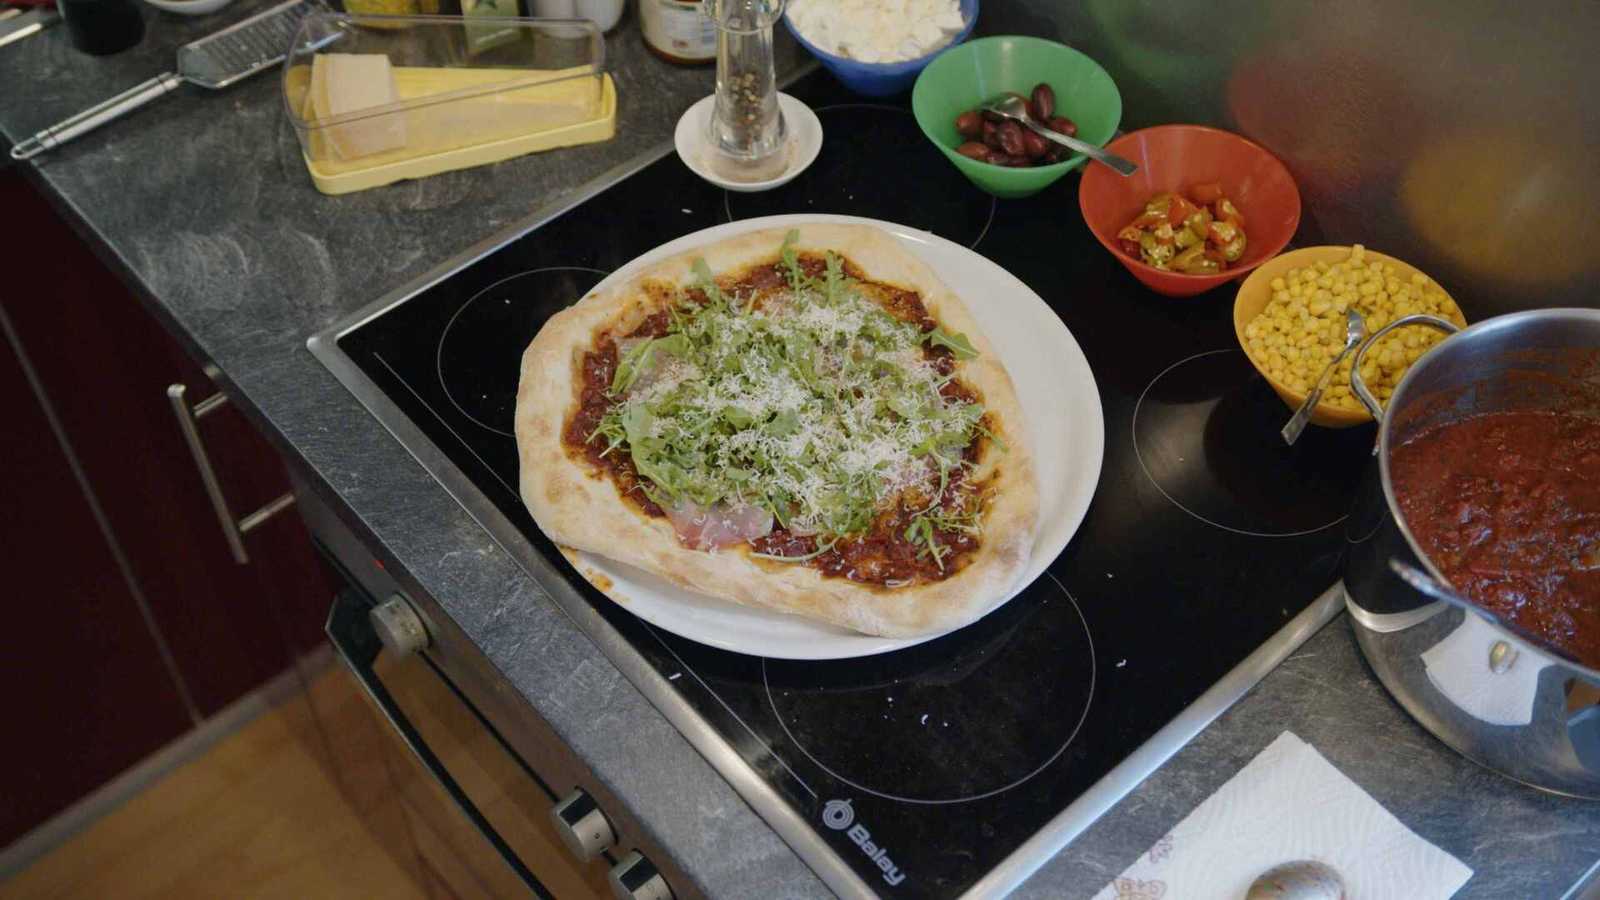 Finished pizza with prosciutto, rocket, pepper, olive oil and parmesan